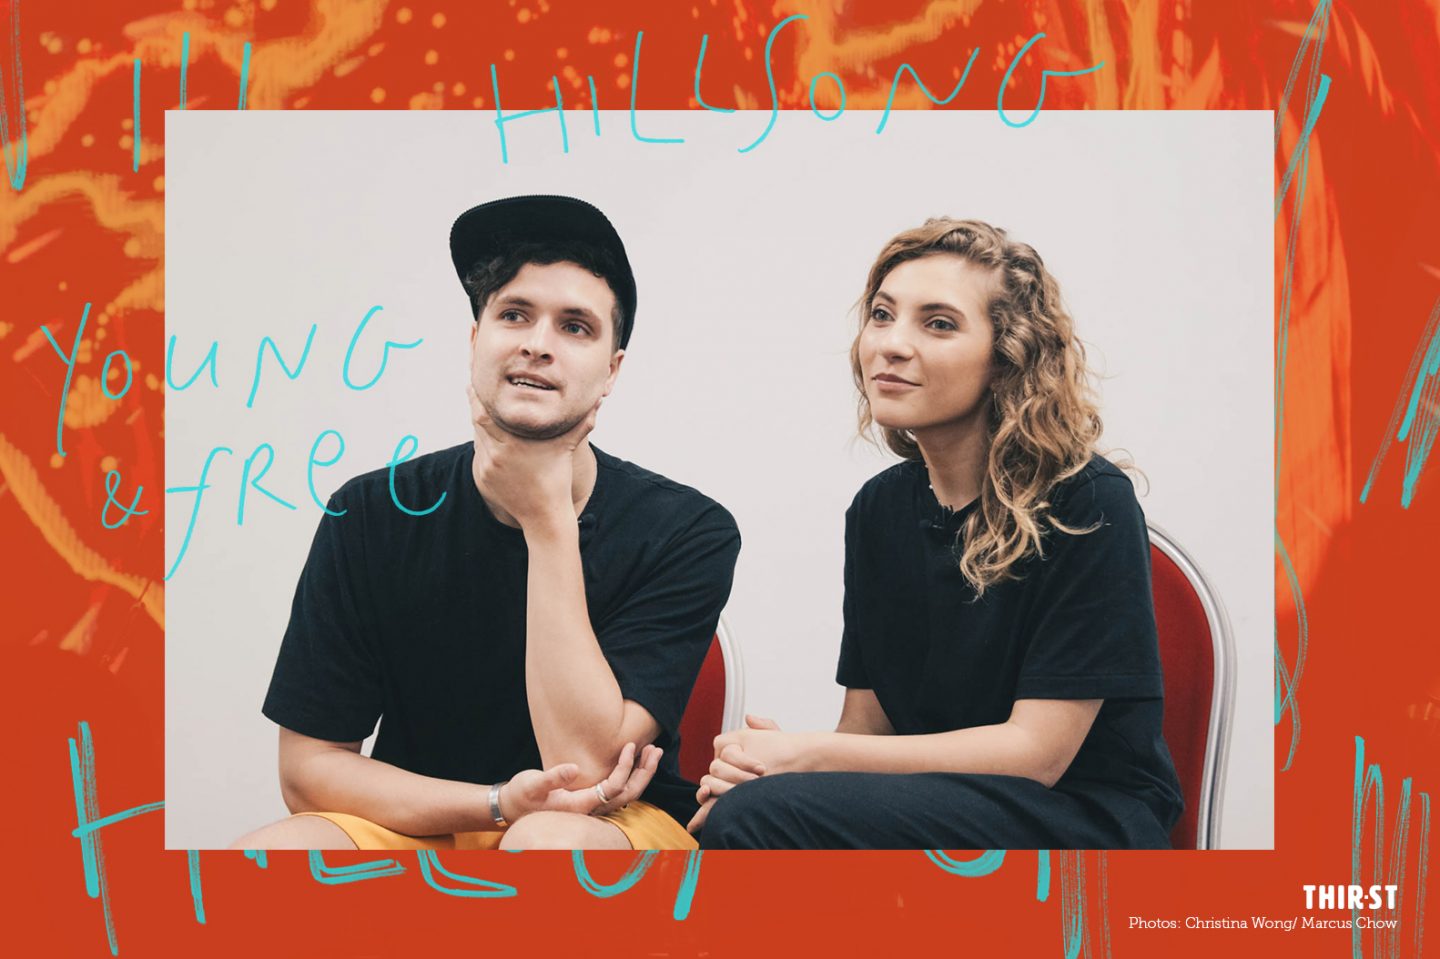 Hillsong Young and Free's worship music is a lot like pop. That's